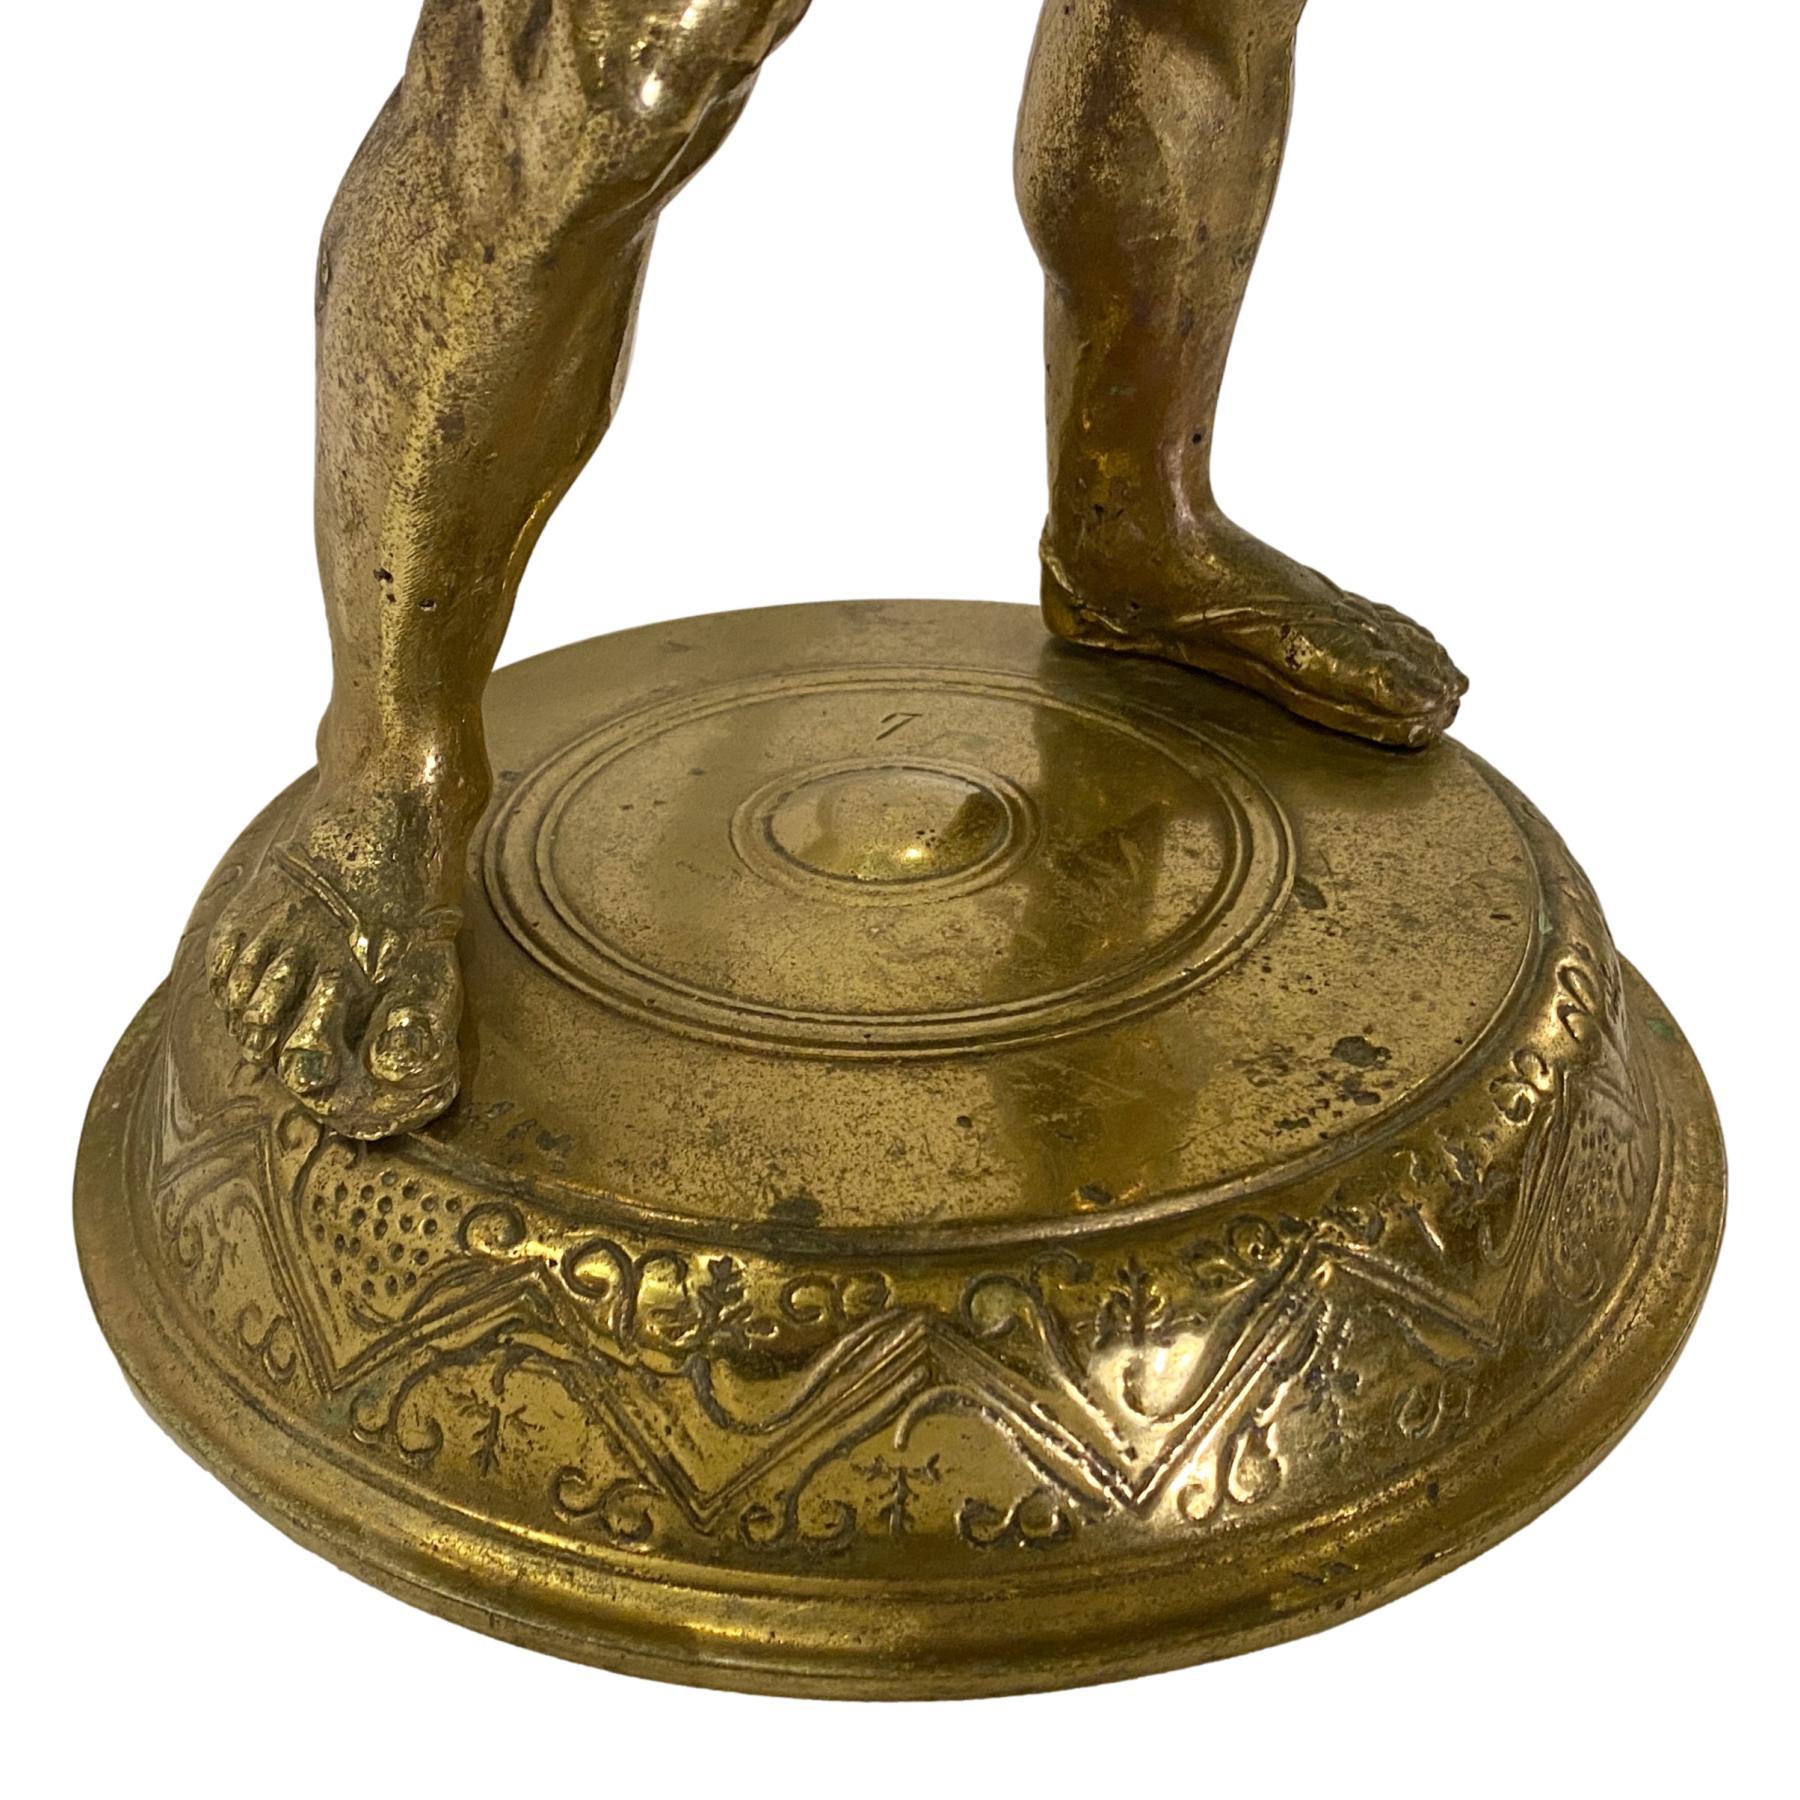 A circa late 19th century Italian cast bronze figure depicting Bacchus holding a woven bronze basket with original patina.

Measurements:
Height 24